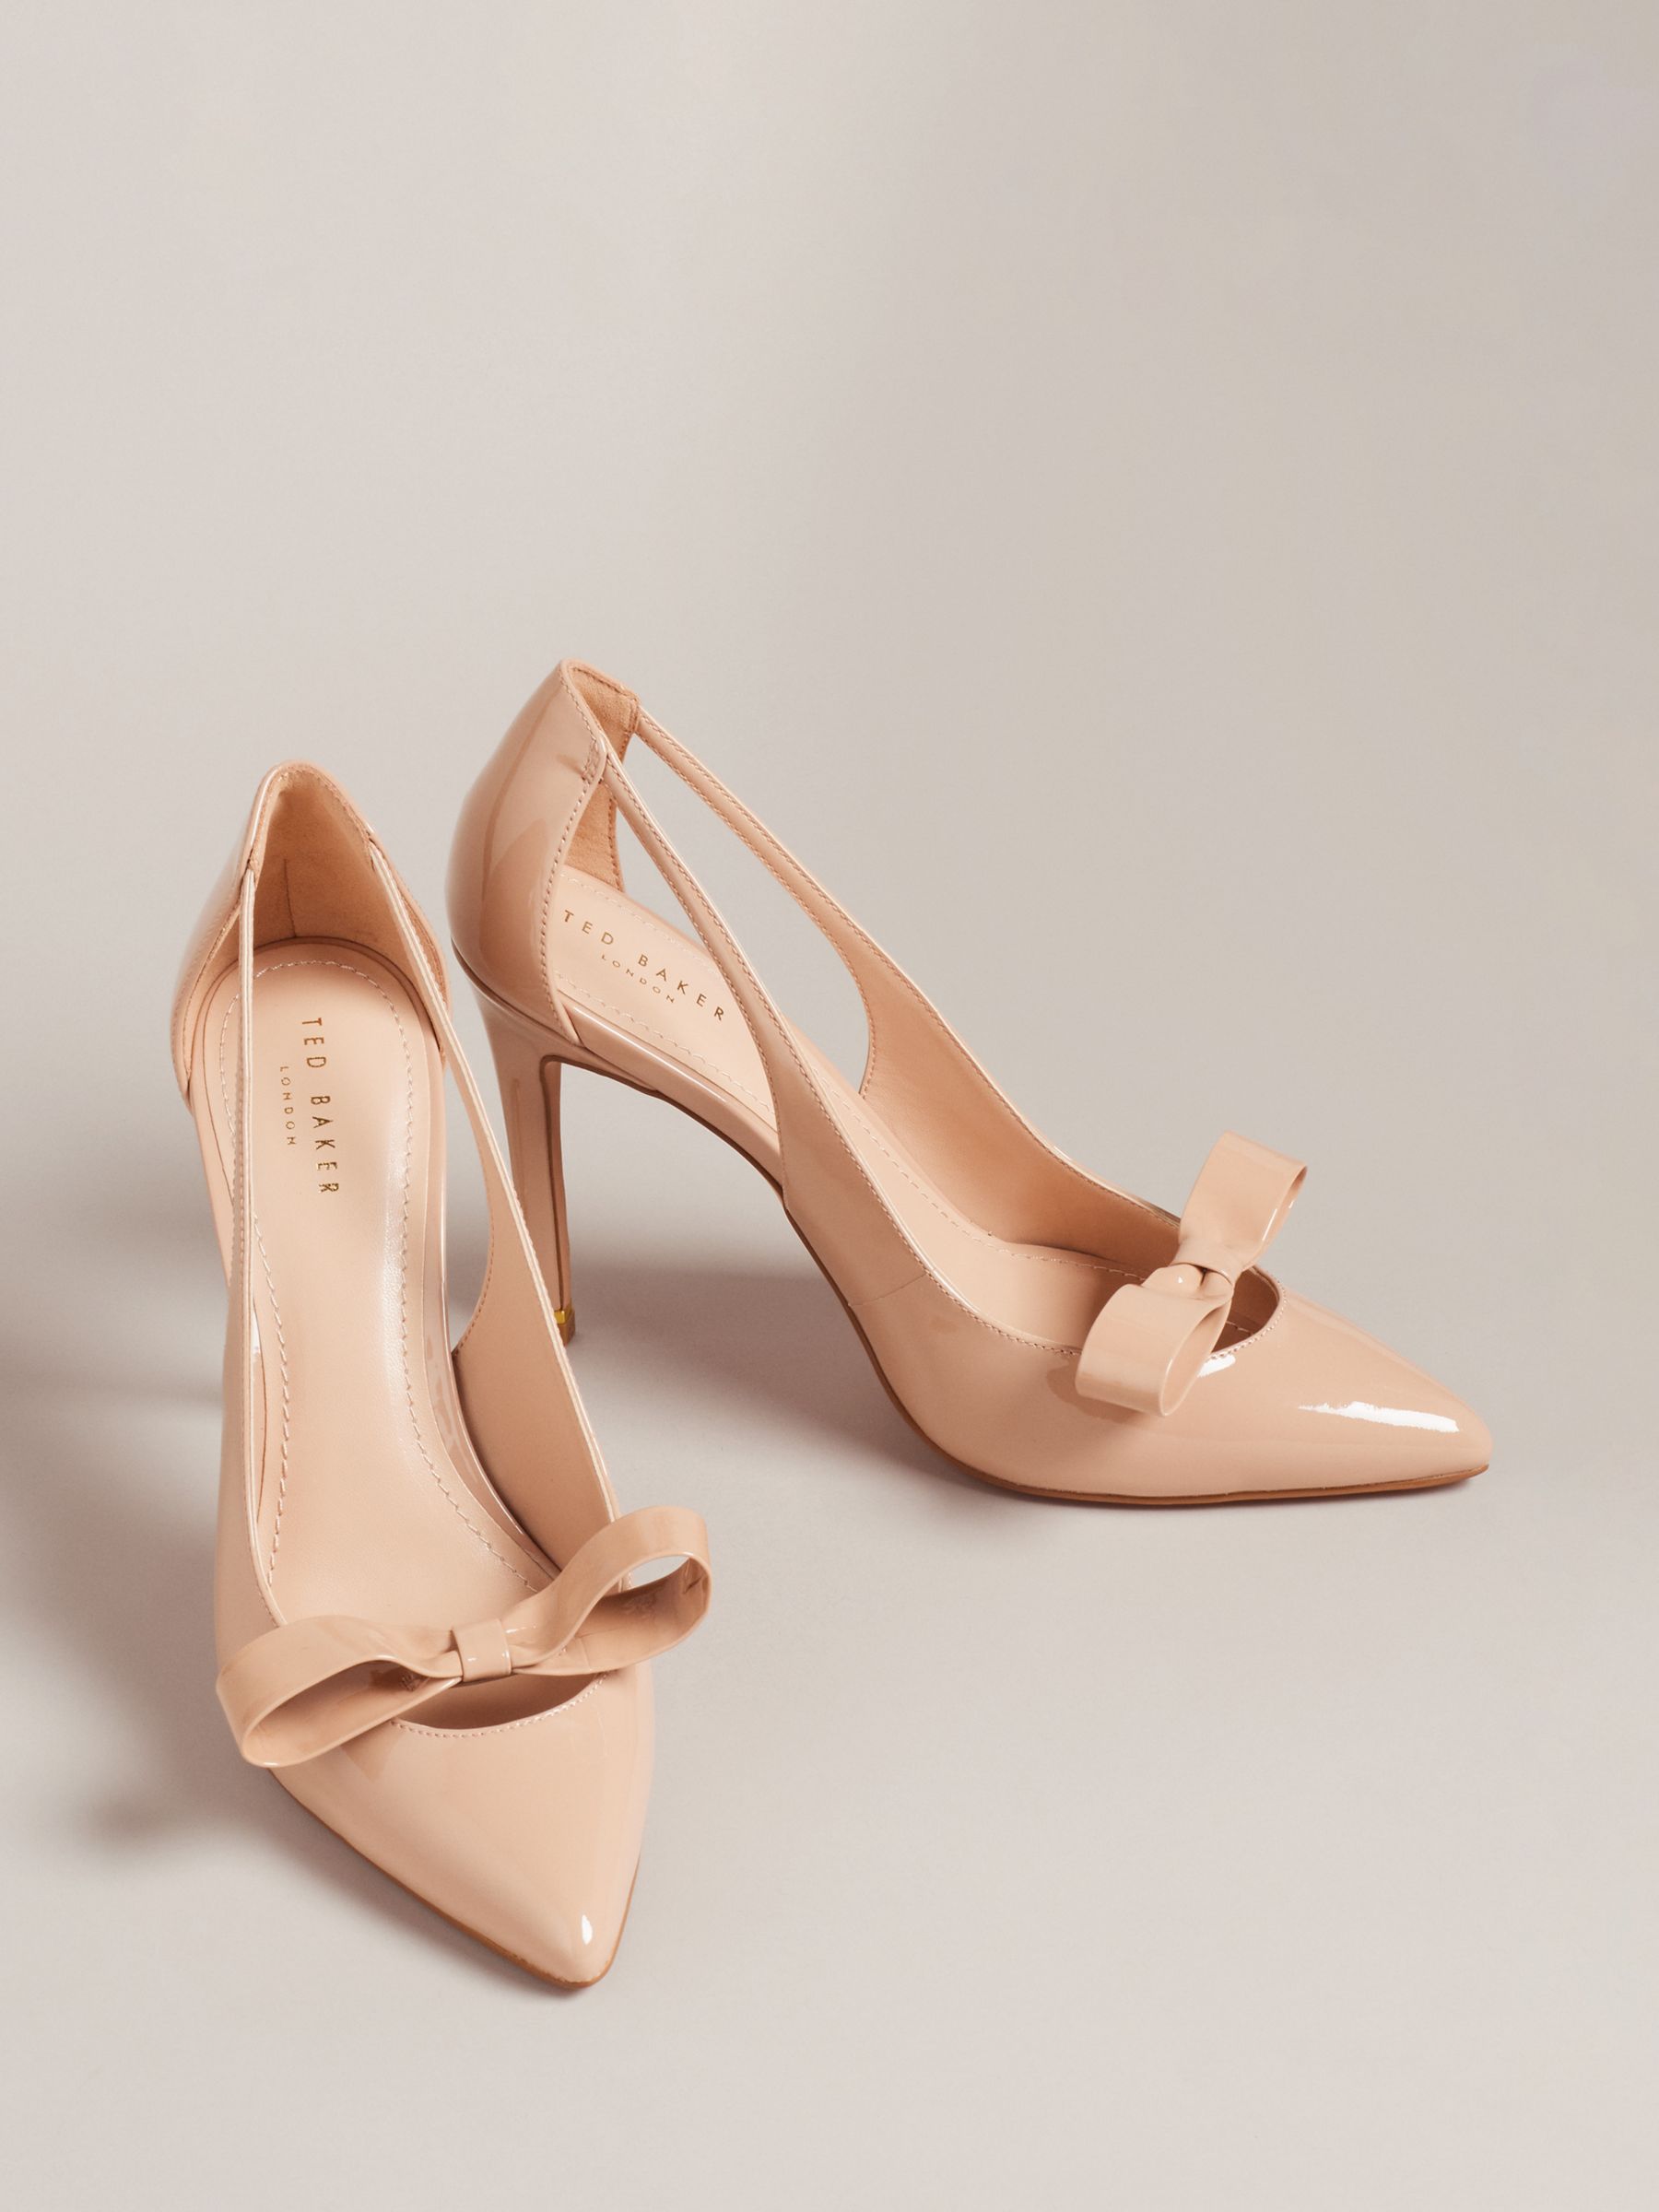 Ted Baker Orliney Patent Bow Cut Out Heeled Court Shoes, Nude, EU37